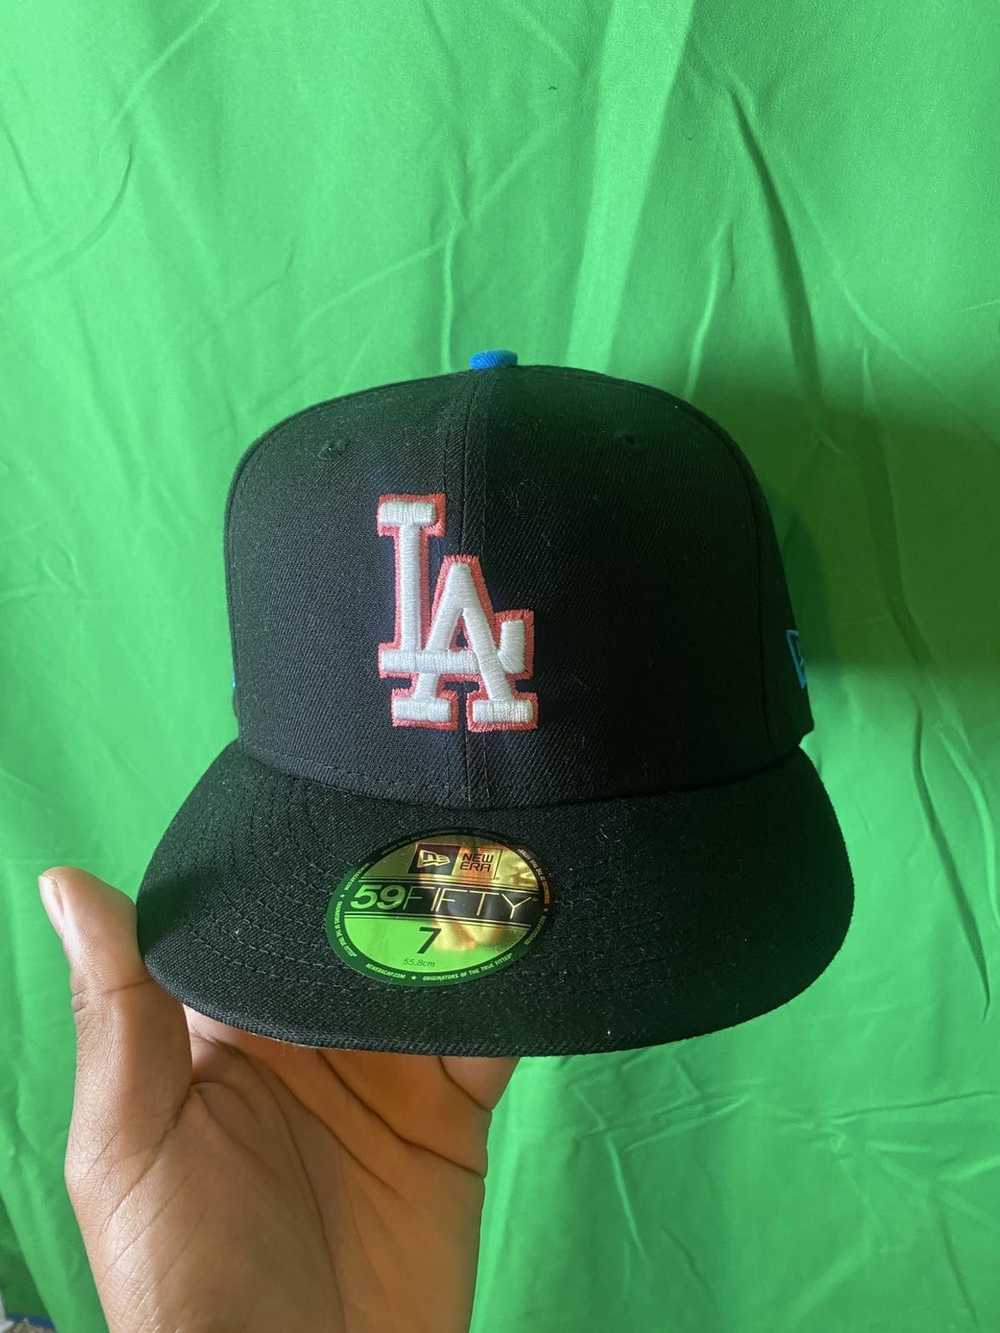 New Era x Politics Los Angeles Dodgers 59FIFTY Fitted Hat - Wood/Merlot, Size 7 by Sneaker Politics